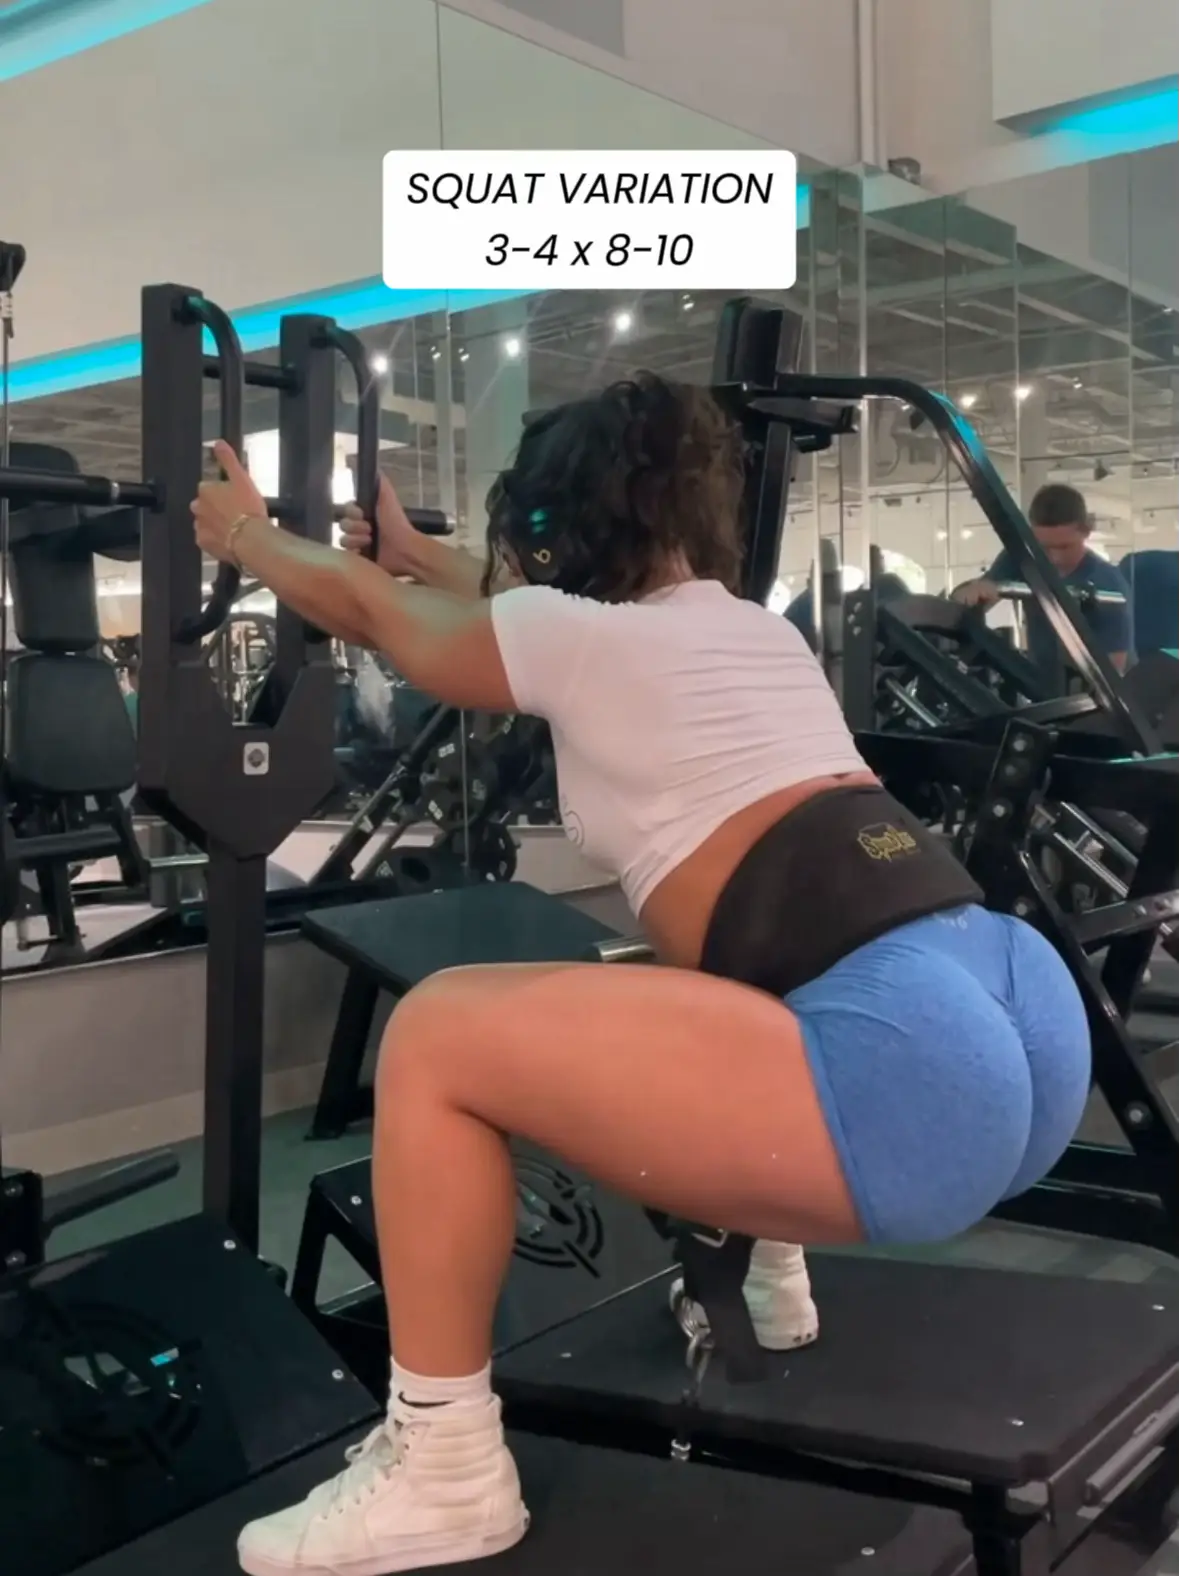 Ok Gymshark - who are these shorts for? The description says they're for  leg day, but I can't imagine anyone wearing these in a gym especially on  leg day. Imagine doing squats